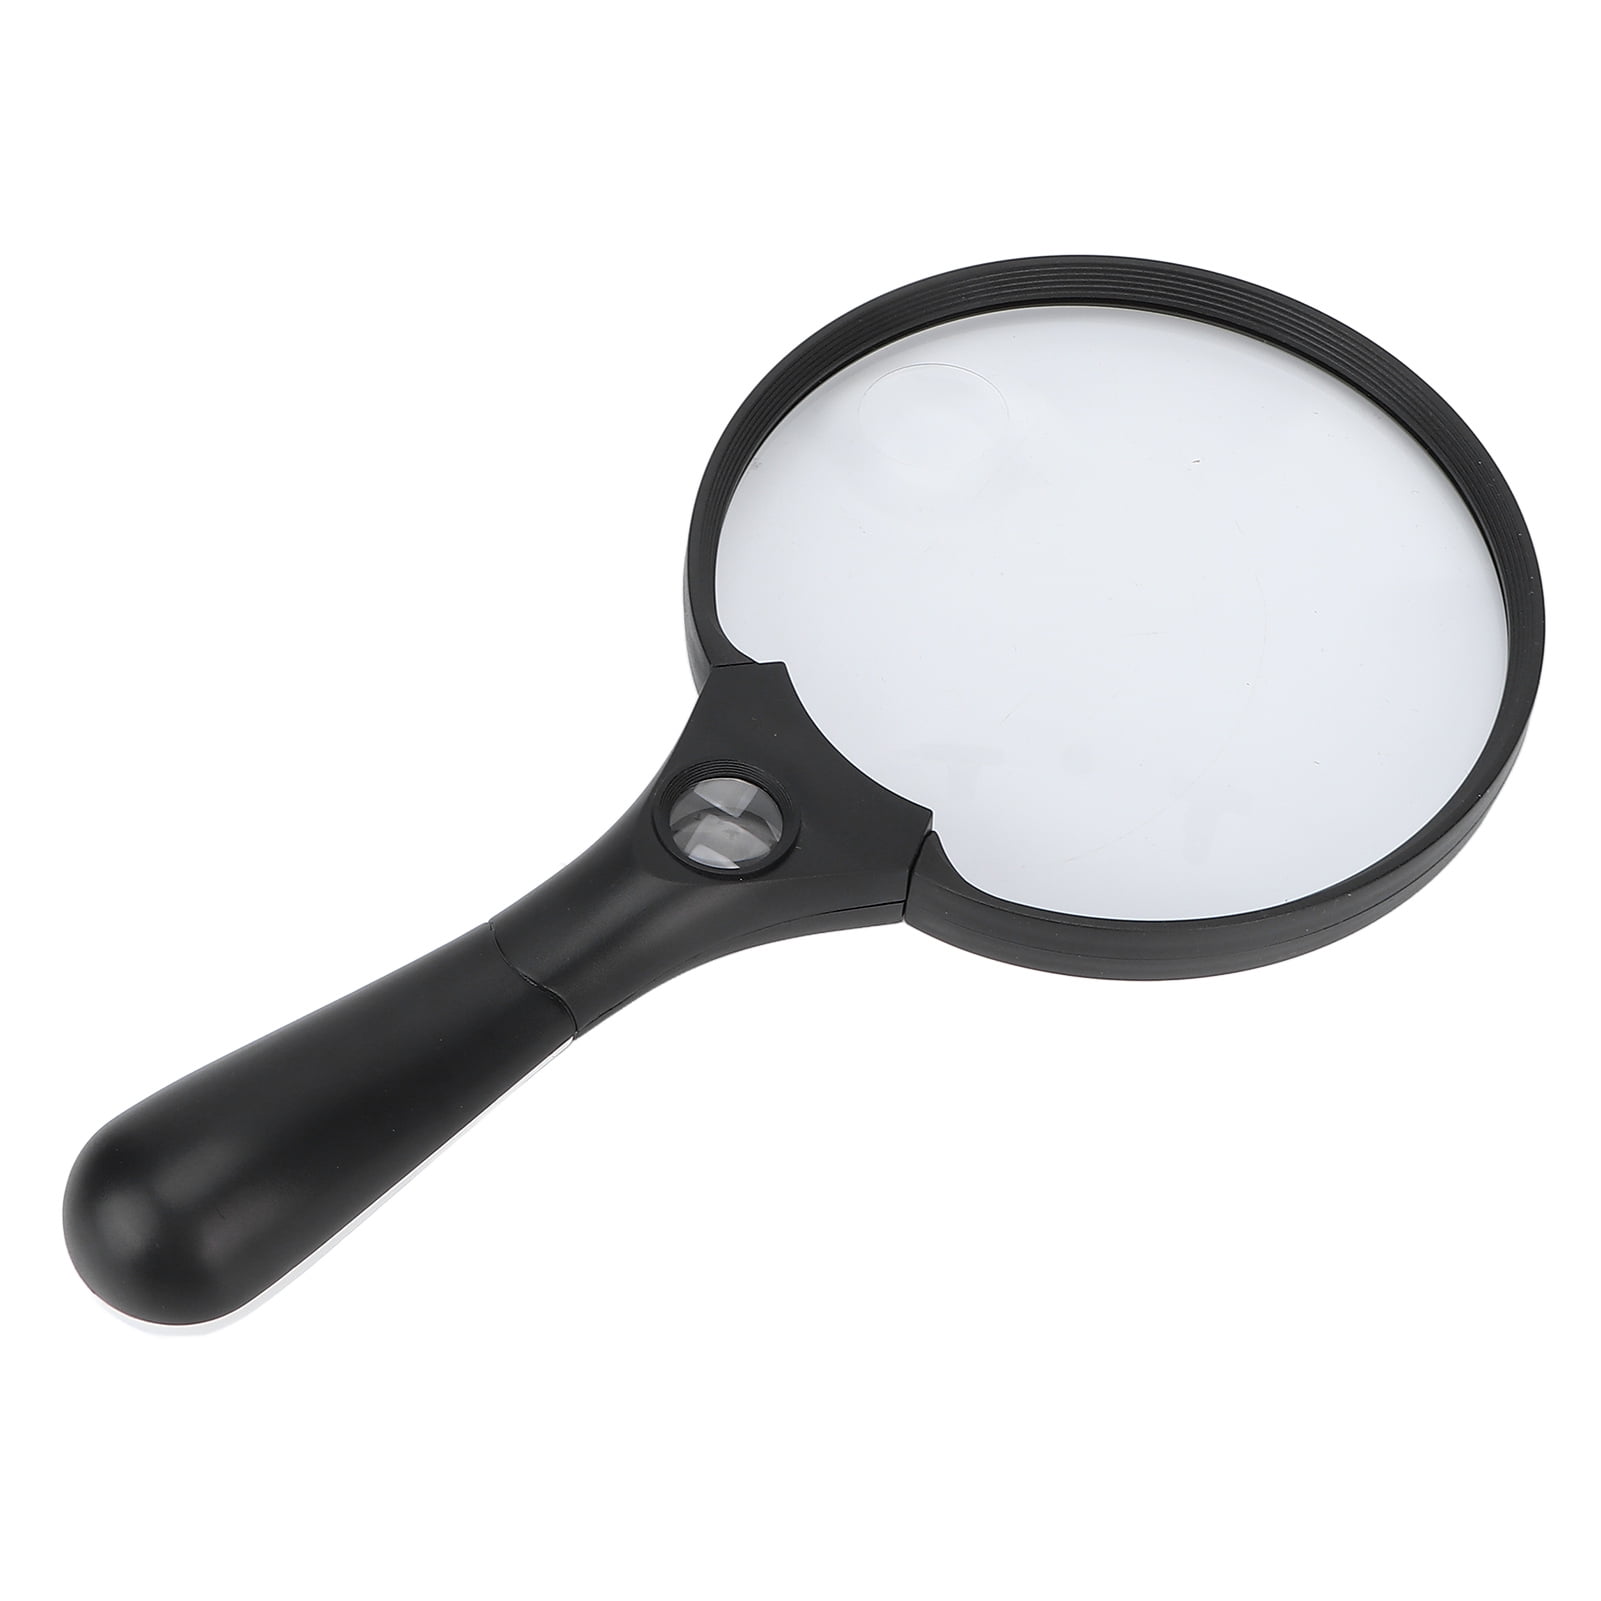 LED Magnifier Magnifying Glass Helping Reading ZOOM Jewelry Ergonomic Handle 